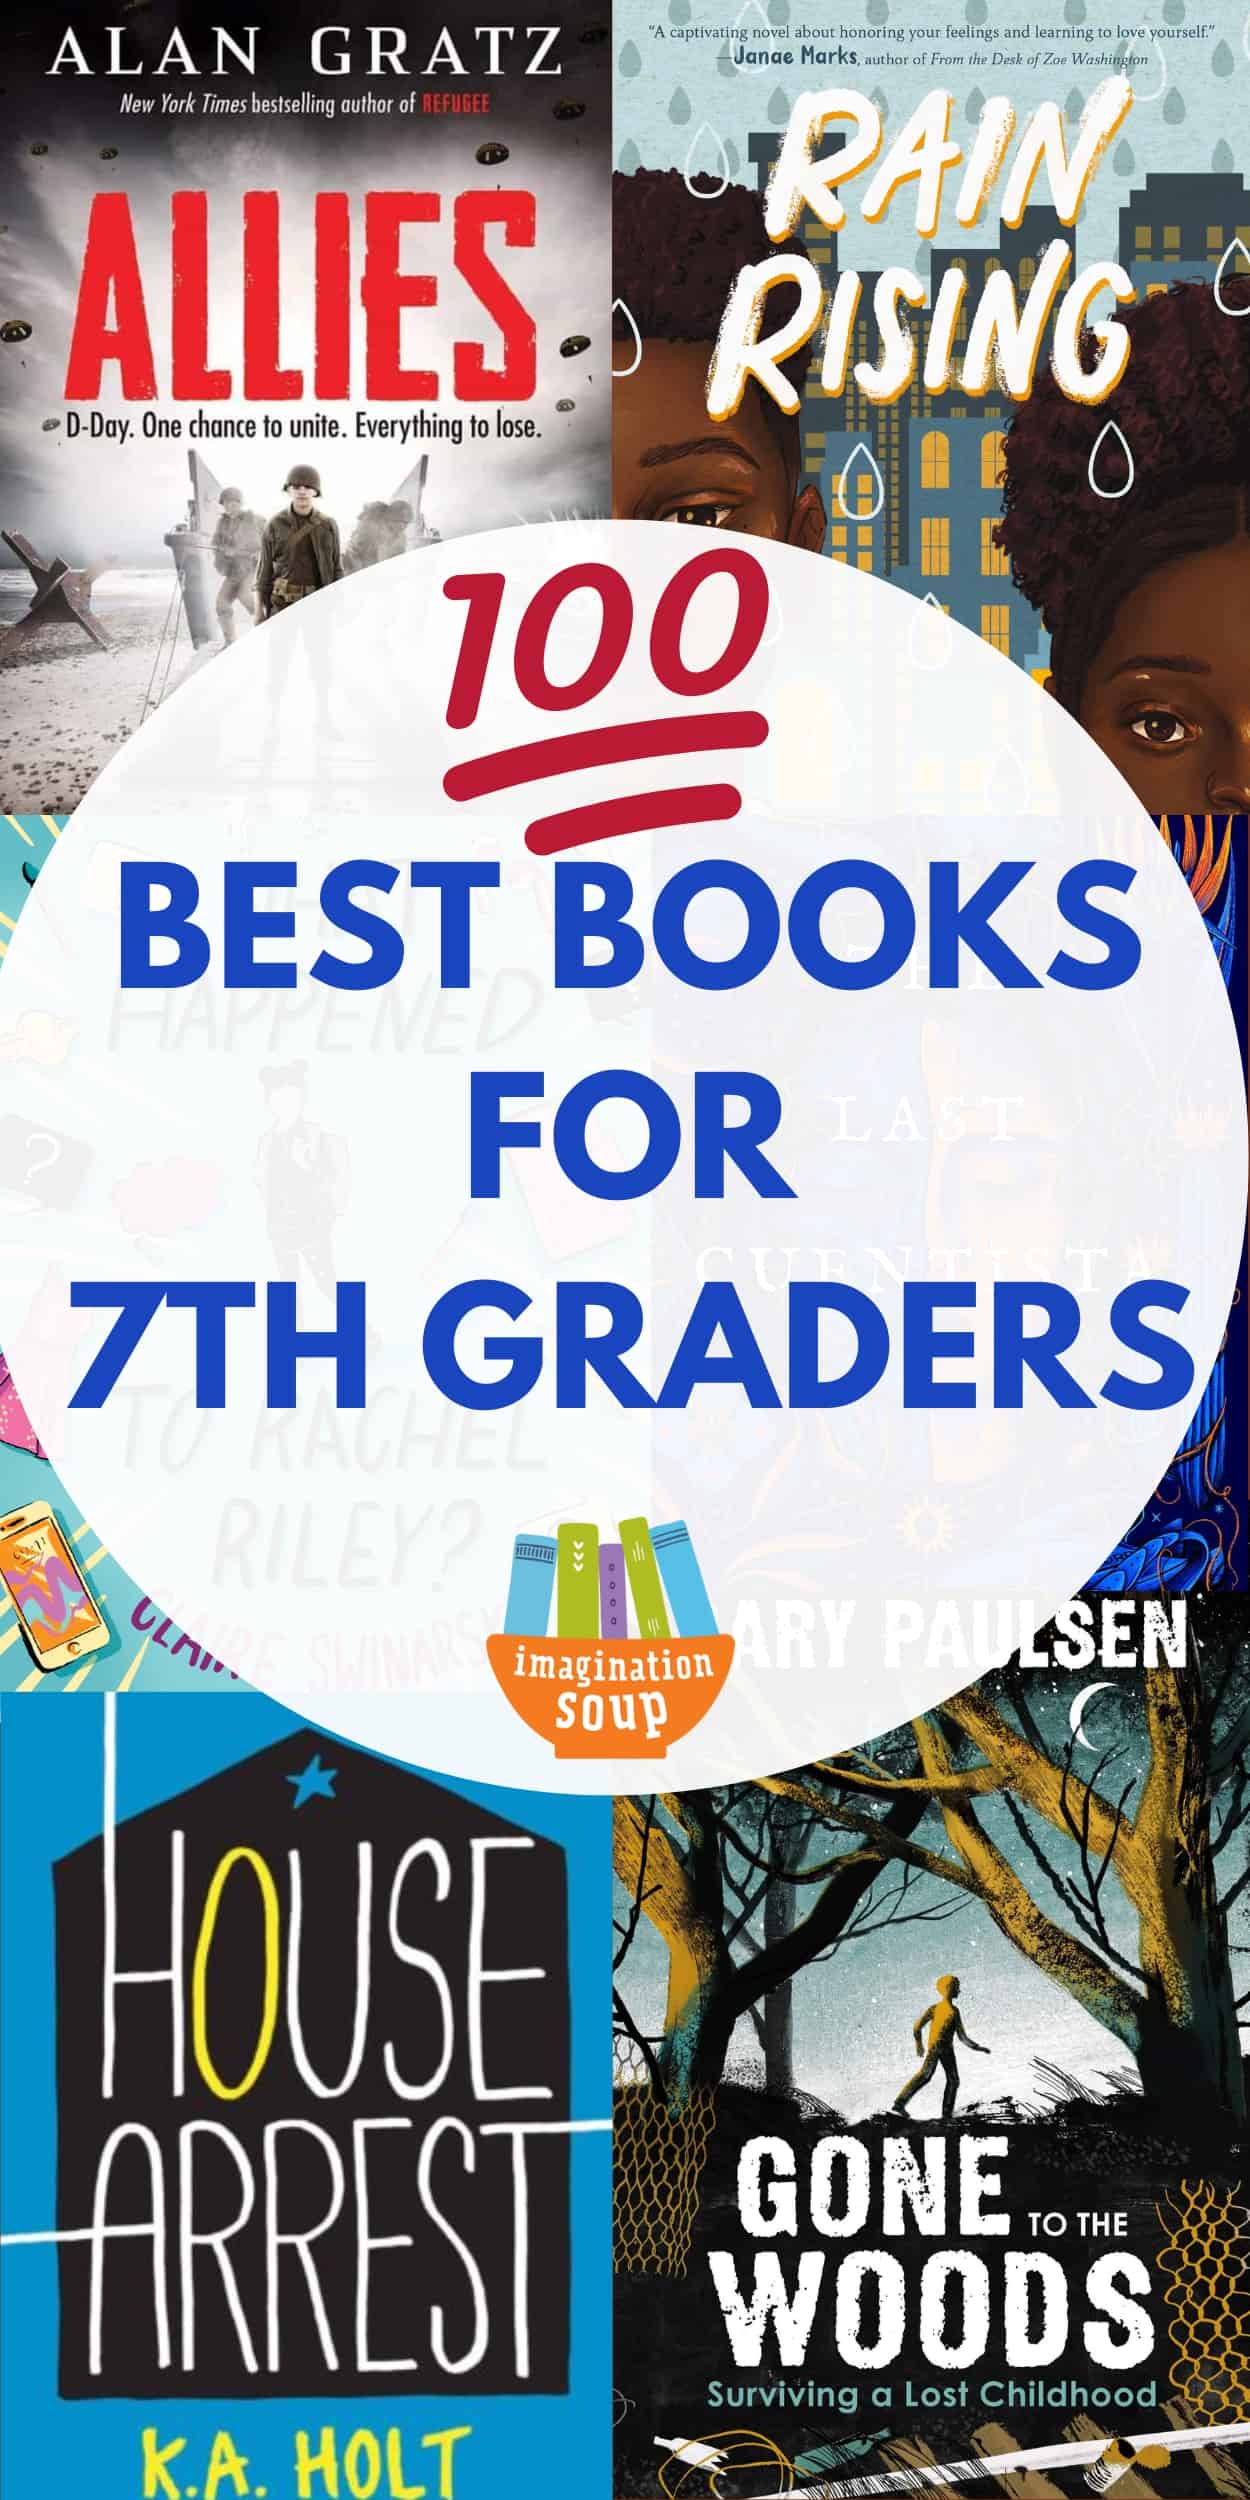 There are so many upper middle grade books for 7th graders in middle school who are 12 or 13 years old, find the best choices in this list.